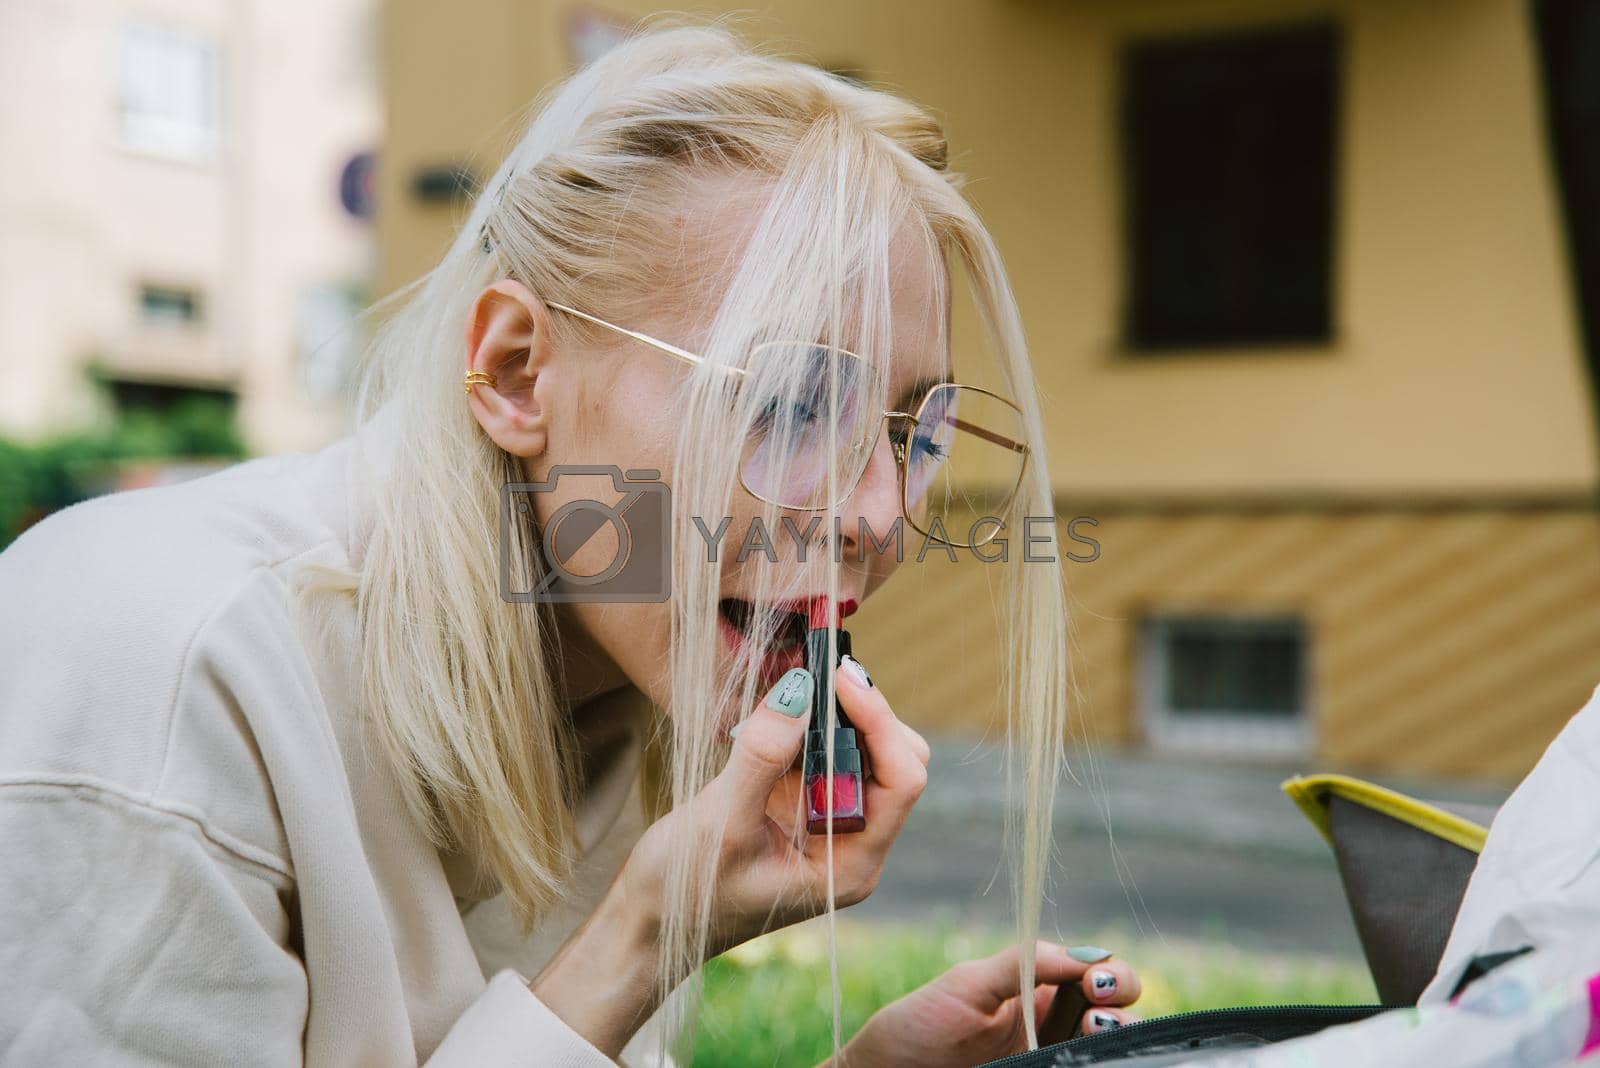 Royalty free image of young smiling hipster happy woman doing make-up using lipstick and mirror outdoors by Ashtray25